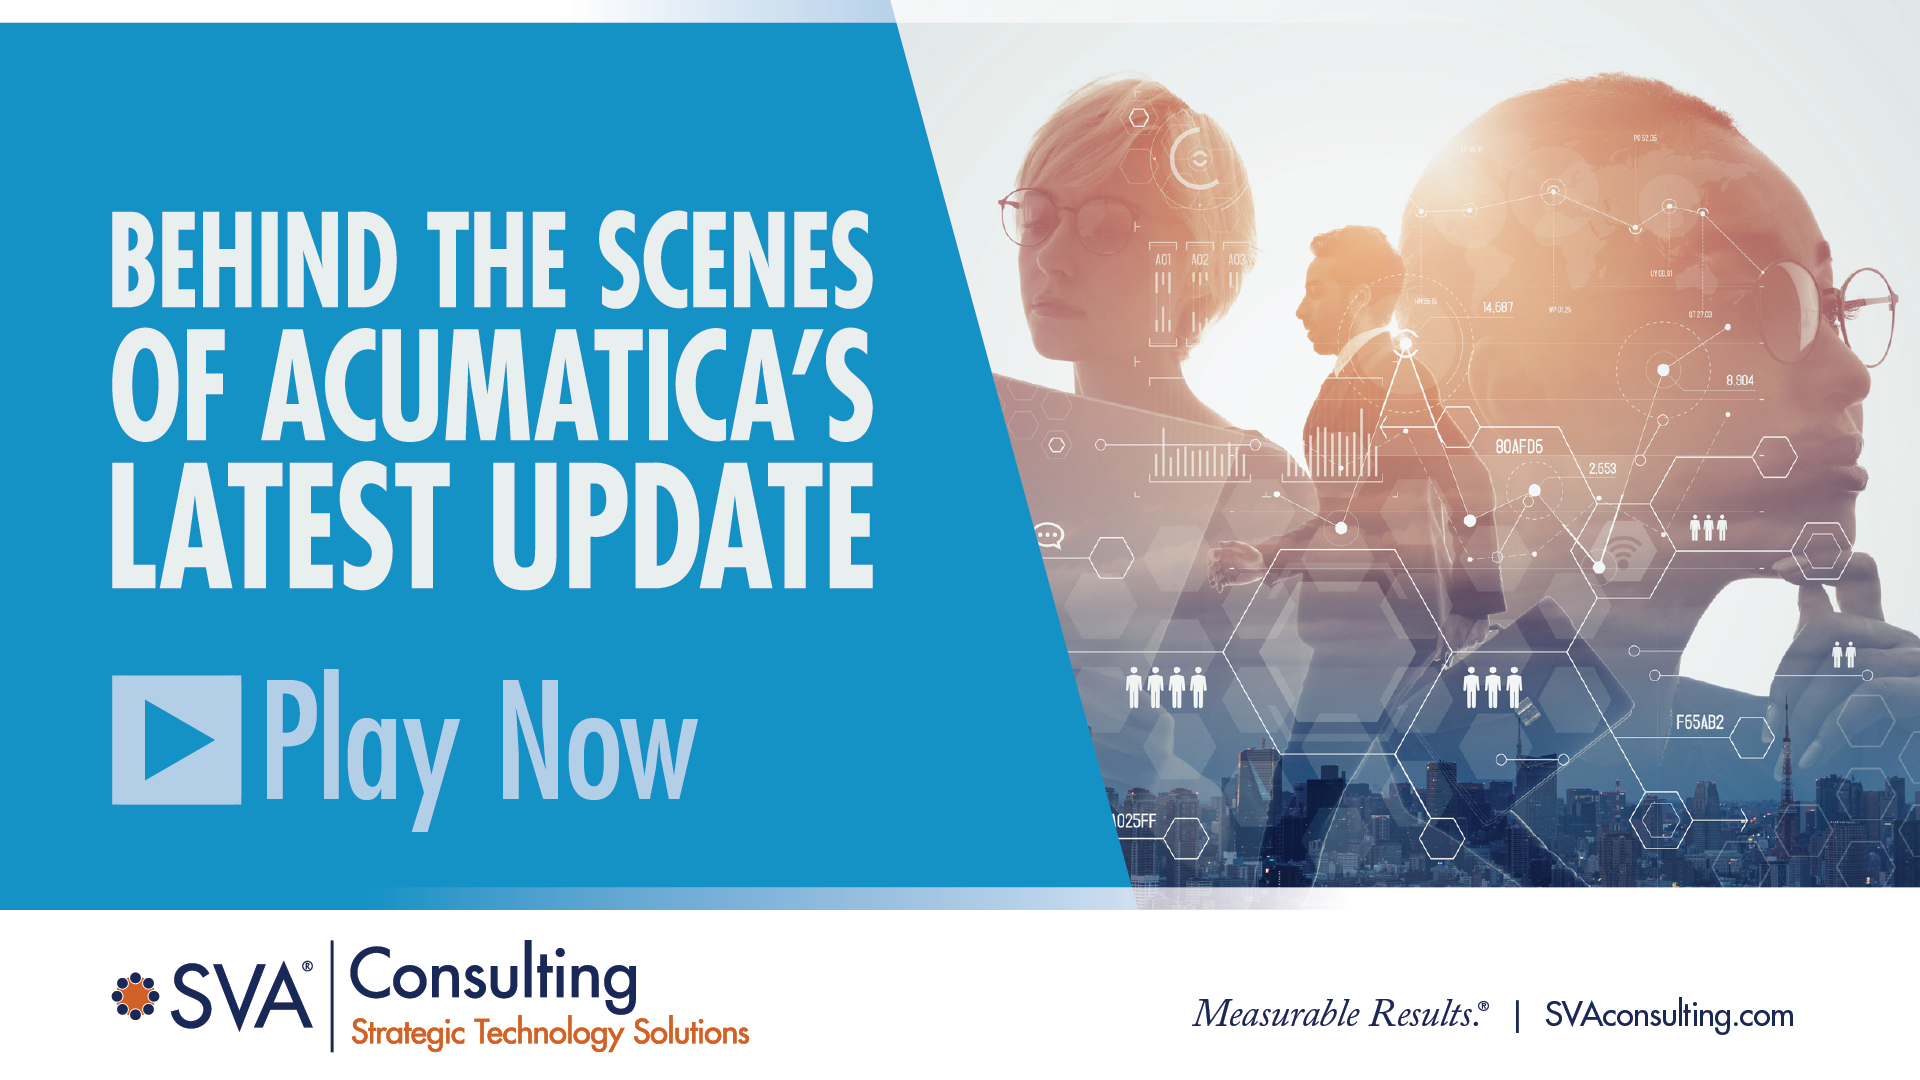 Behind the Scenes of Acumatica’s Latest Update